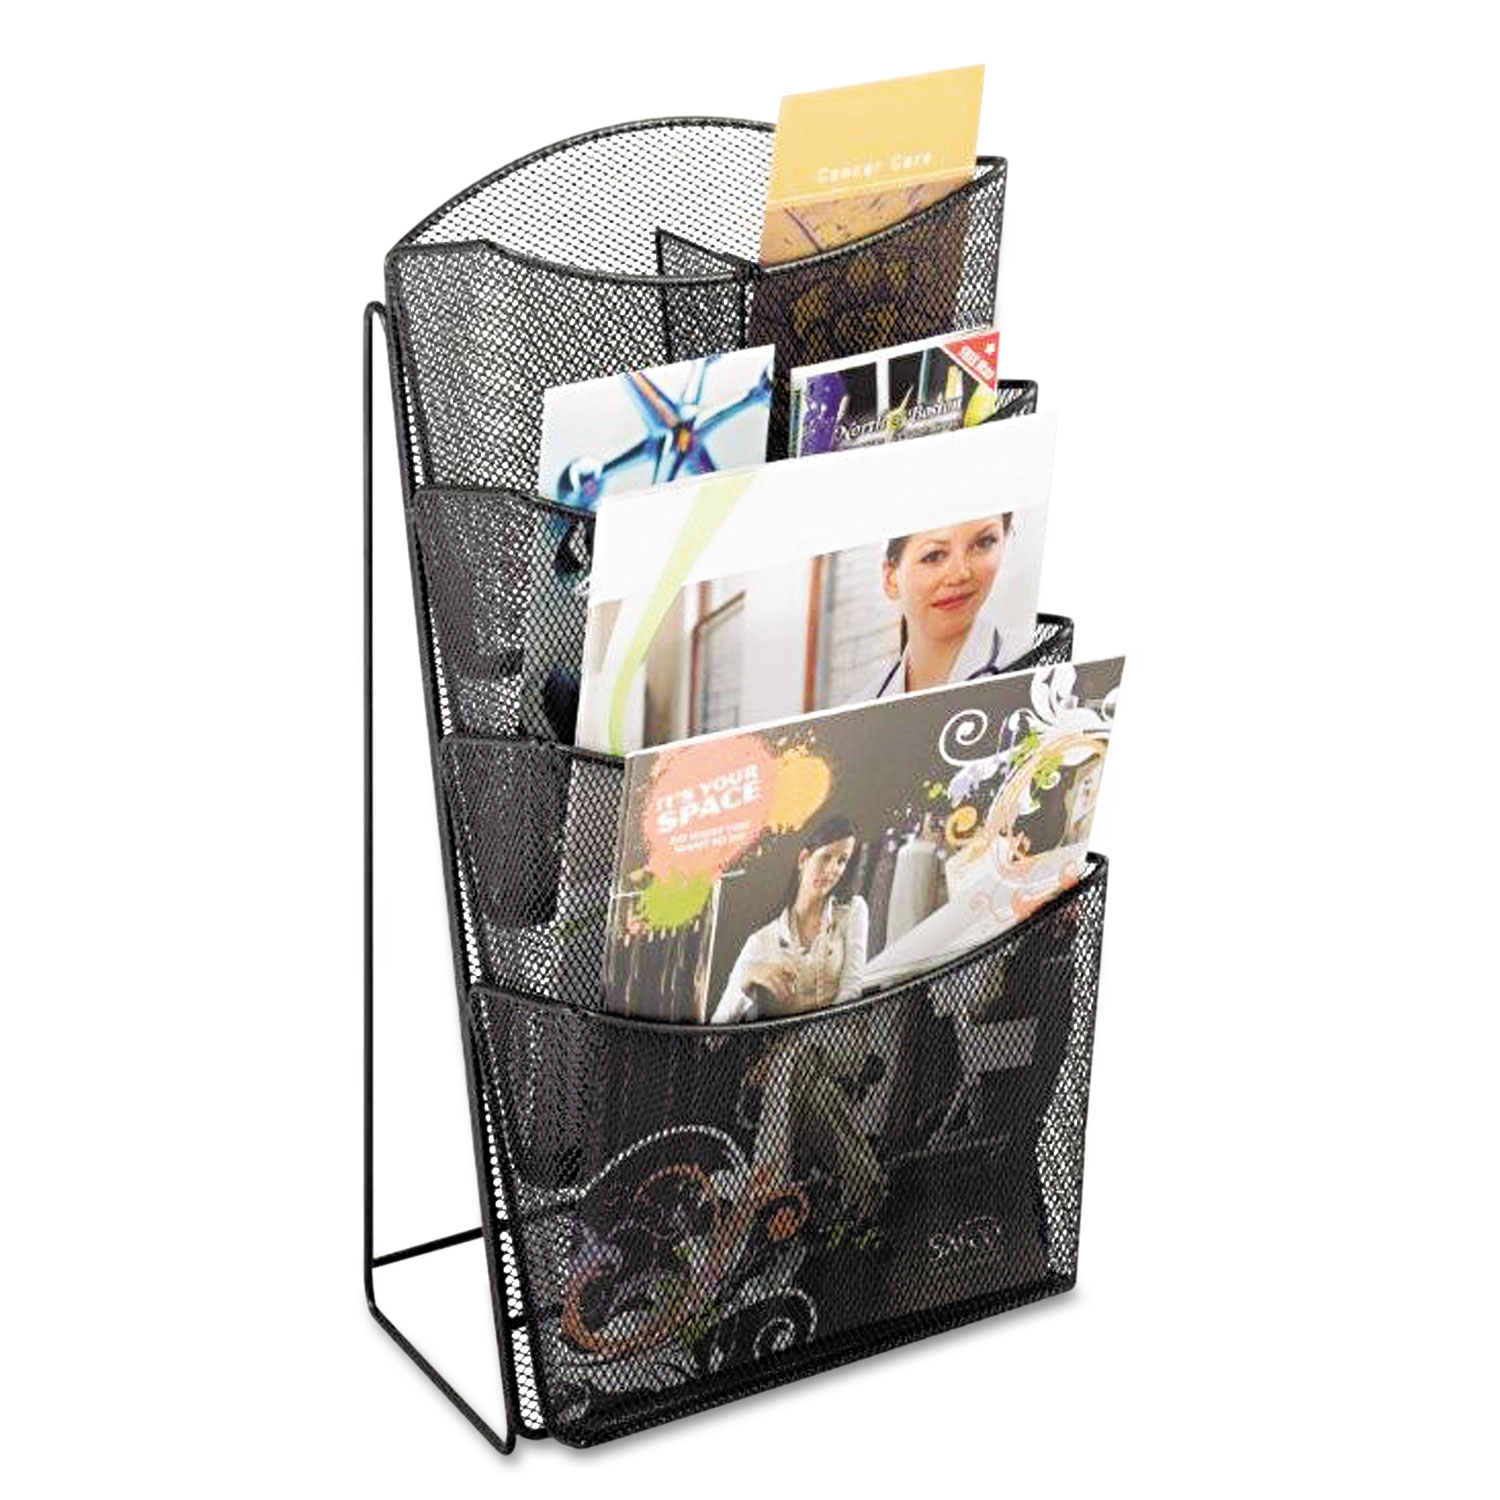 Onyx Mesh Counter Display, Four Compartments, 9 3/4w x 9 1/2d x 18h, Black